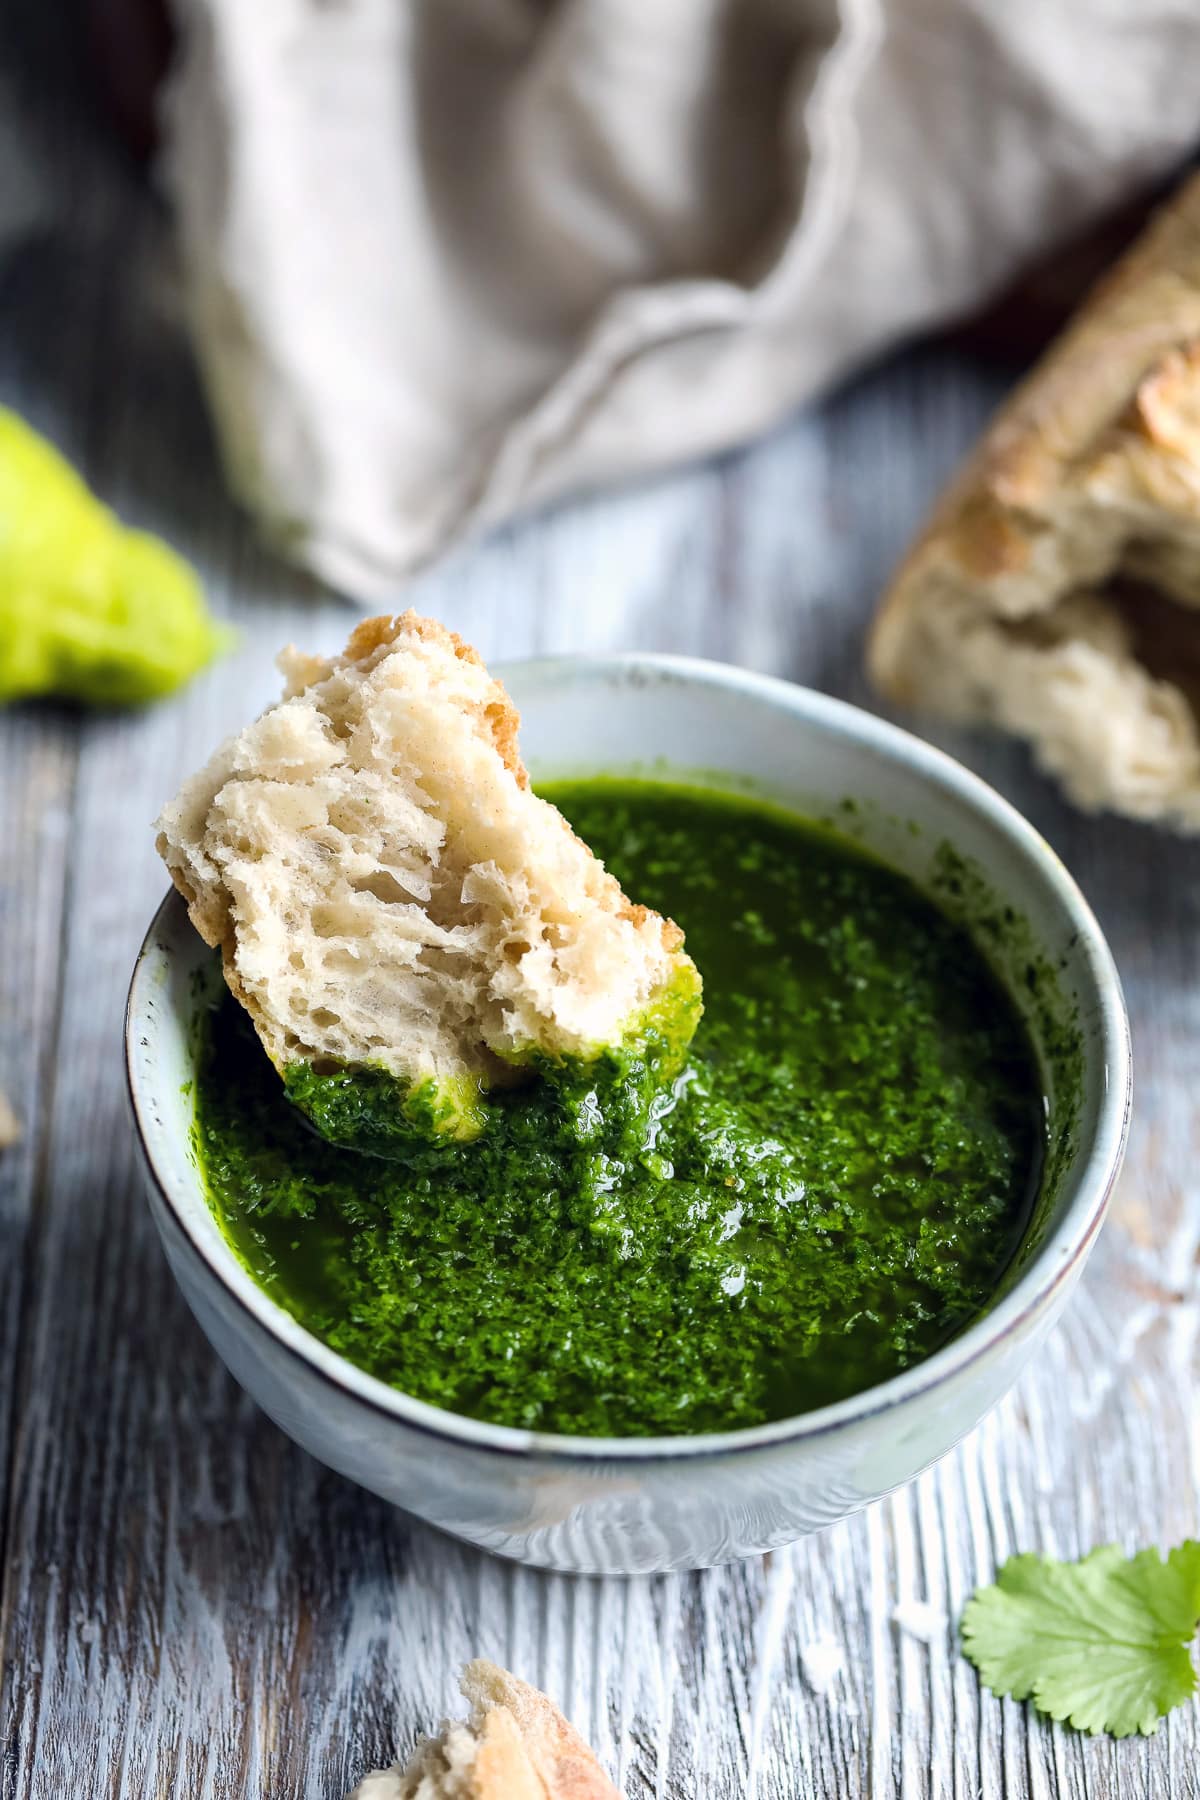 Mojo Verde in a Bowl with a Piece of Bread.